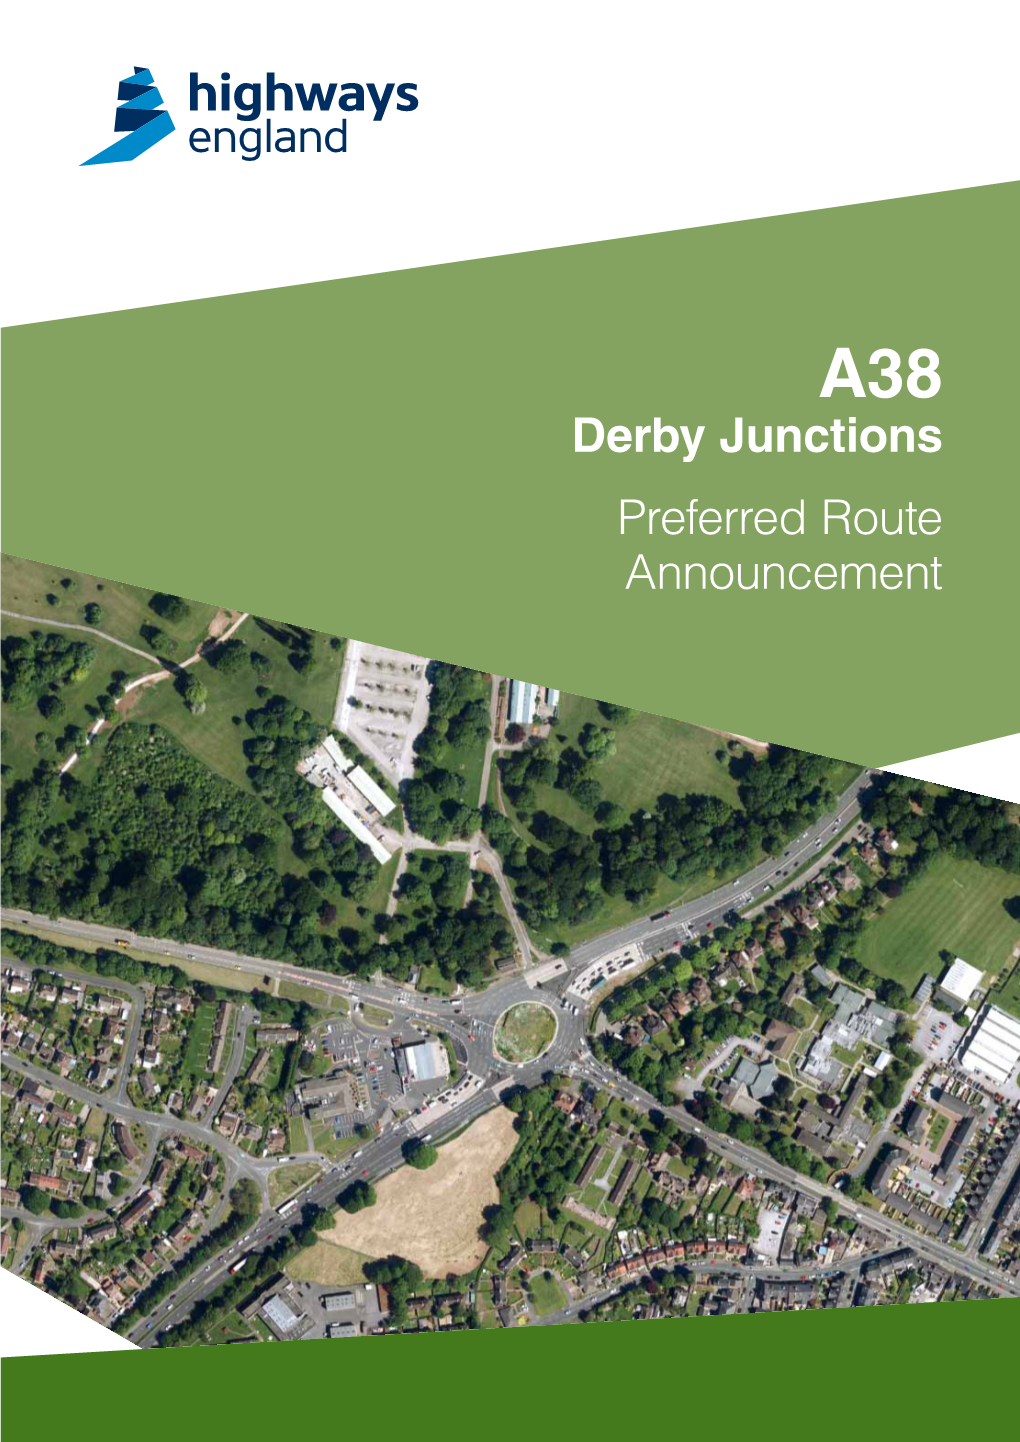 A38 Derby Junctions Preferred Route Announcement A38 Derby Junctions – Preferred Route Announcement